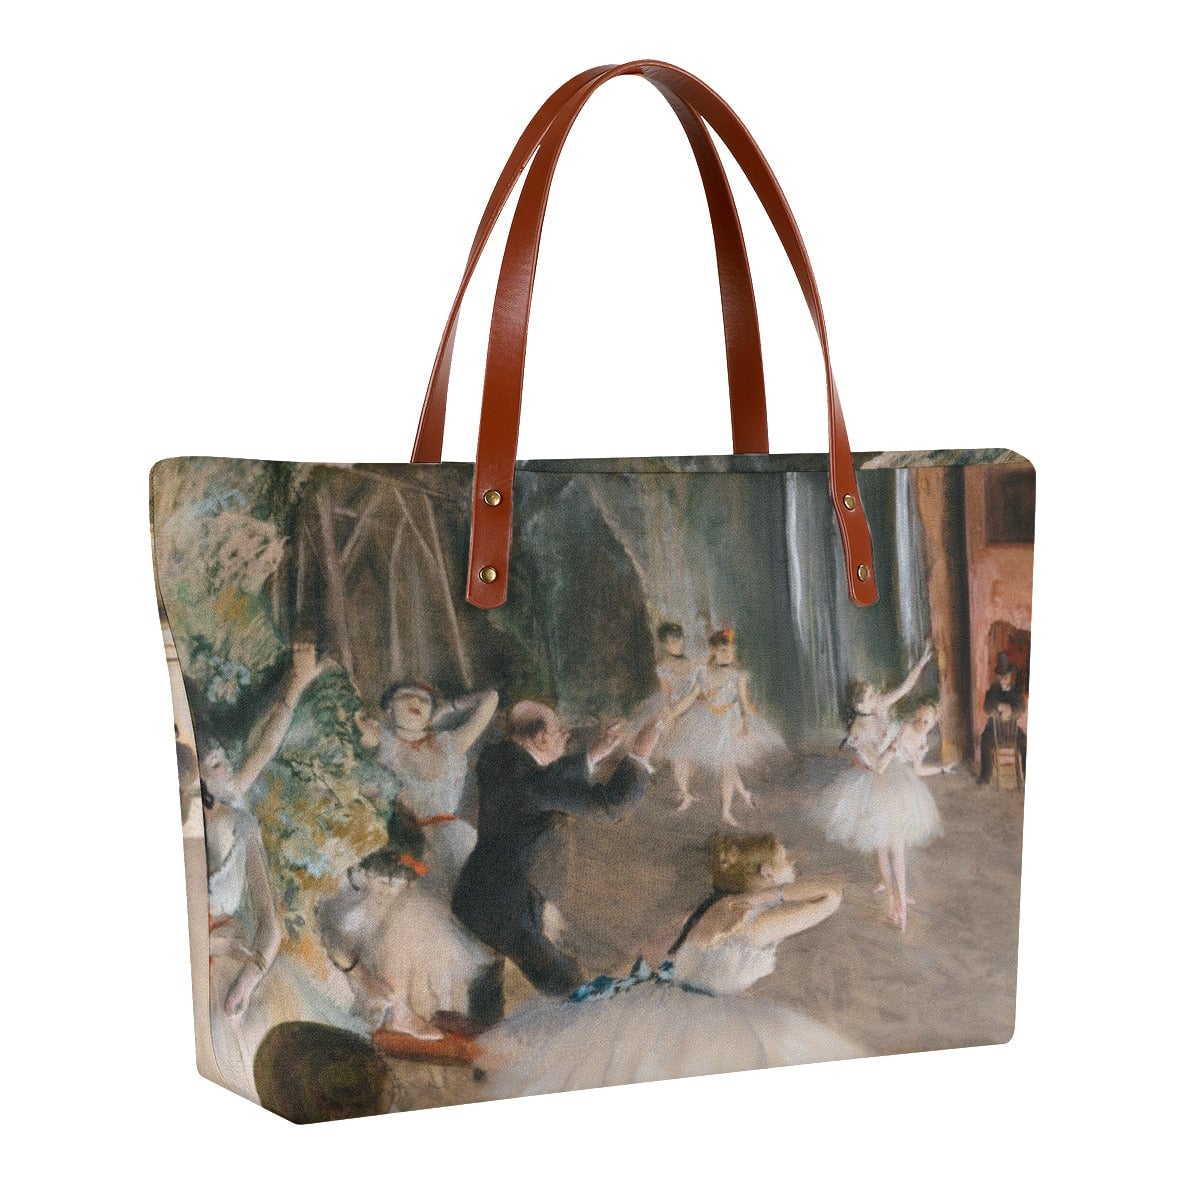 The Rehearsal Onstage by Edgar Degas Tote Bag